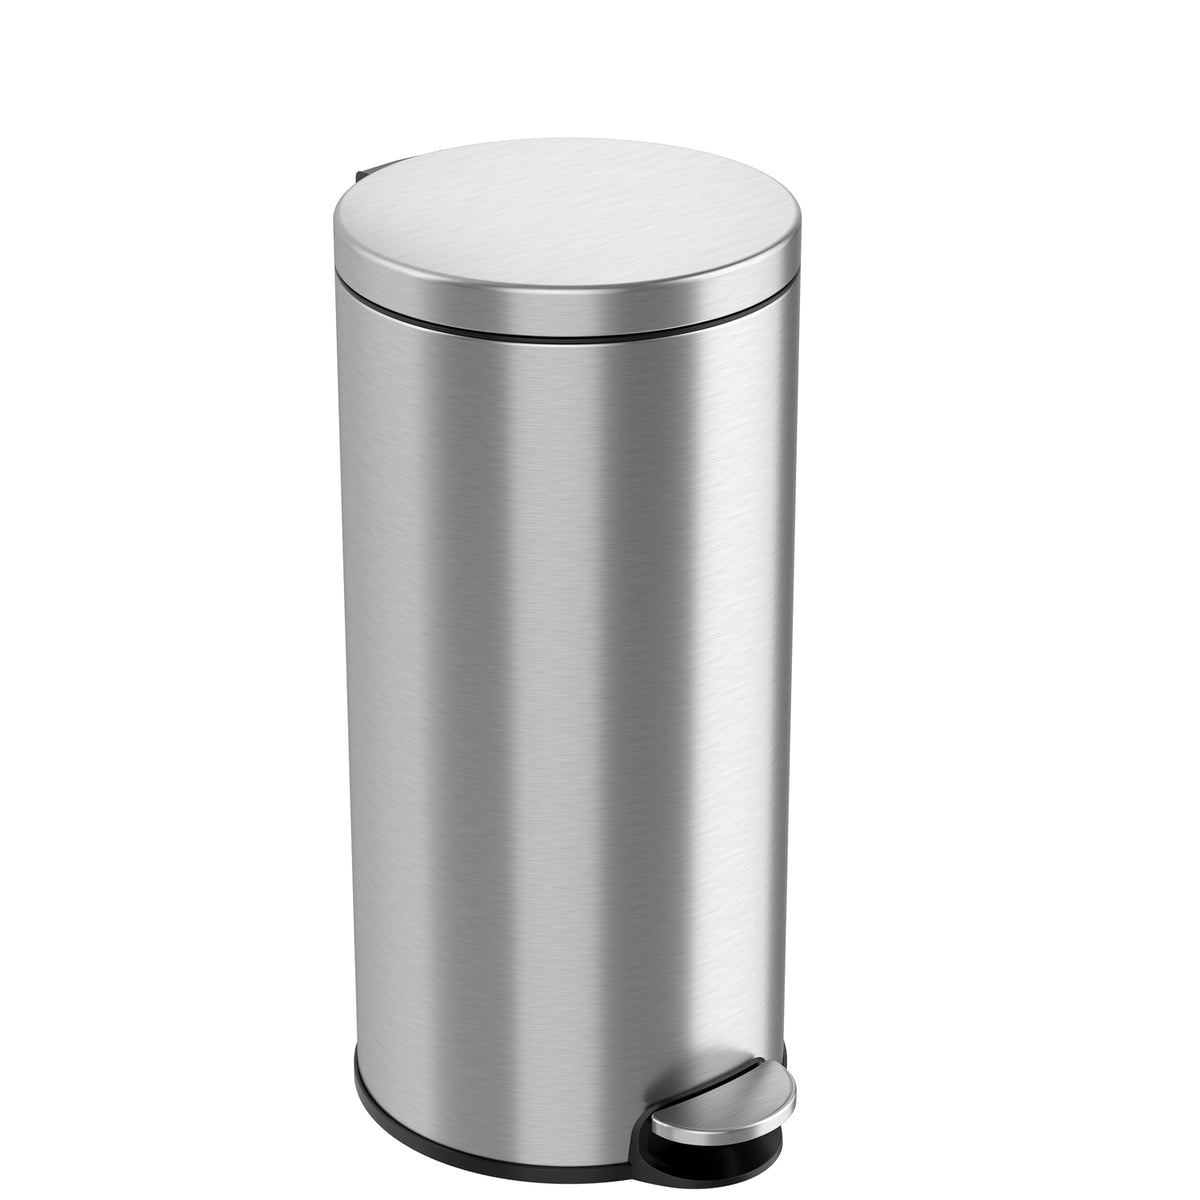 mDesign Slim Metal 1.3 Gallon Step Trash Can with Lid and Liner